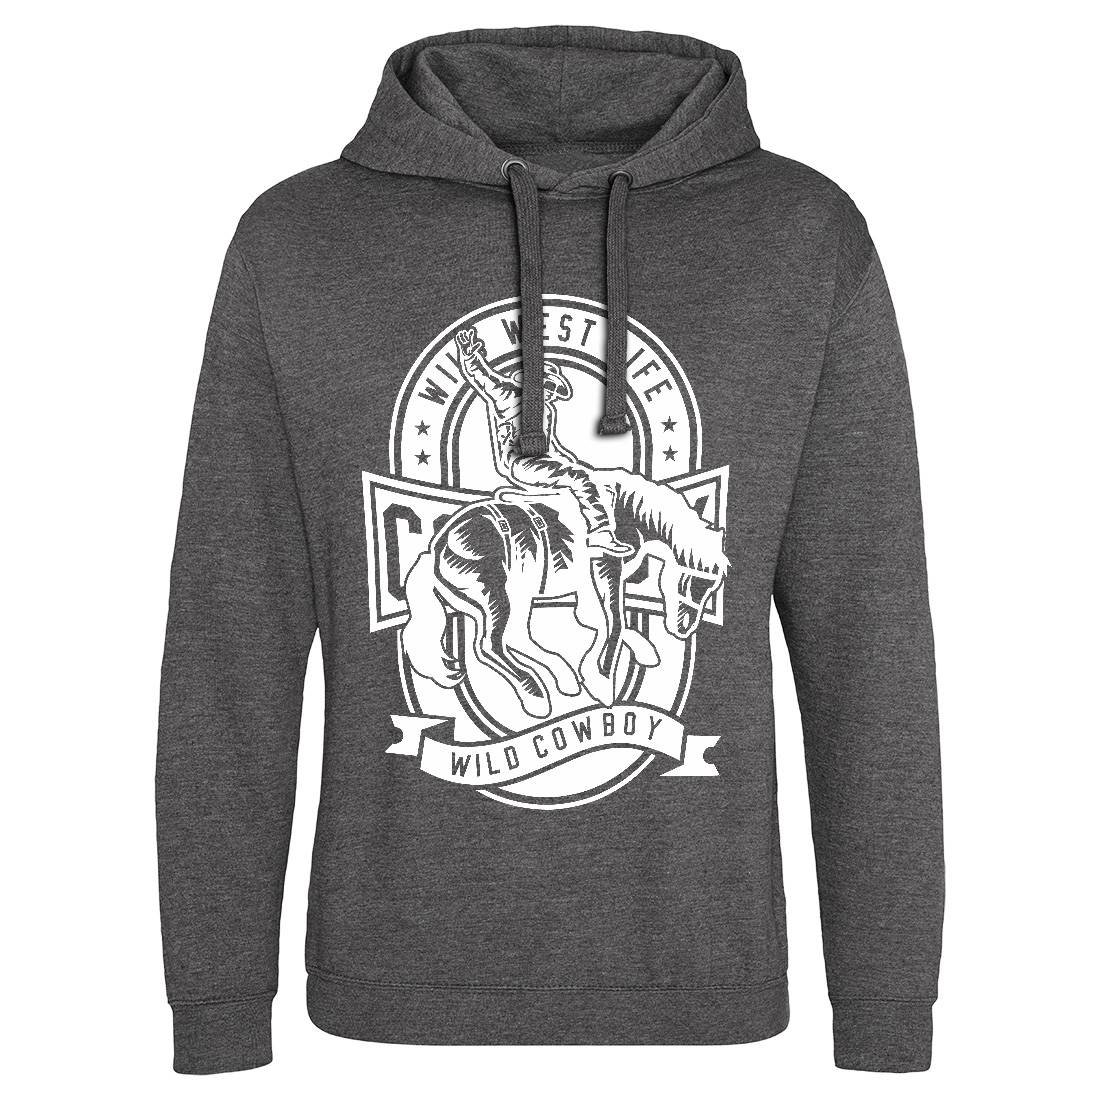 Wild West Mens Hoodie Without Pocket American B671